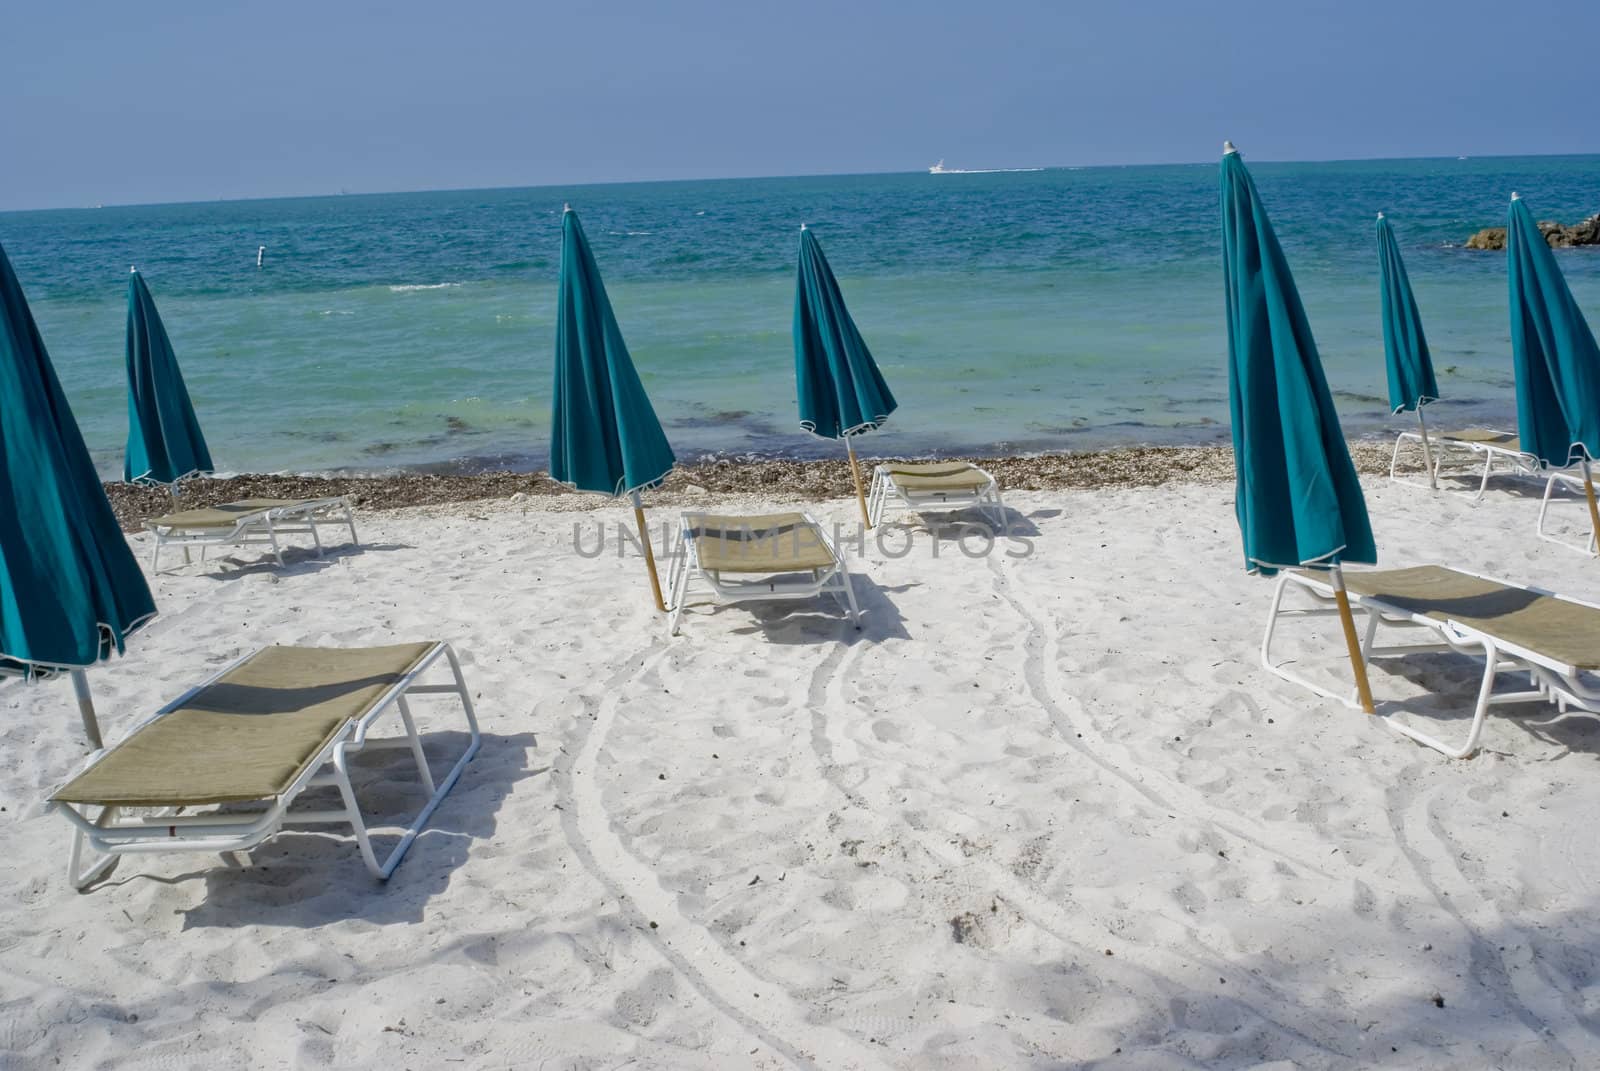 A set of beach umbrellas and recliners waiting for bodies.